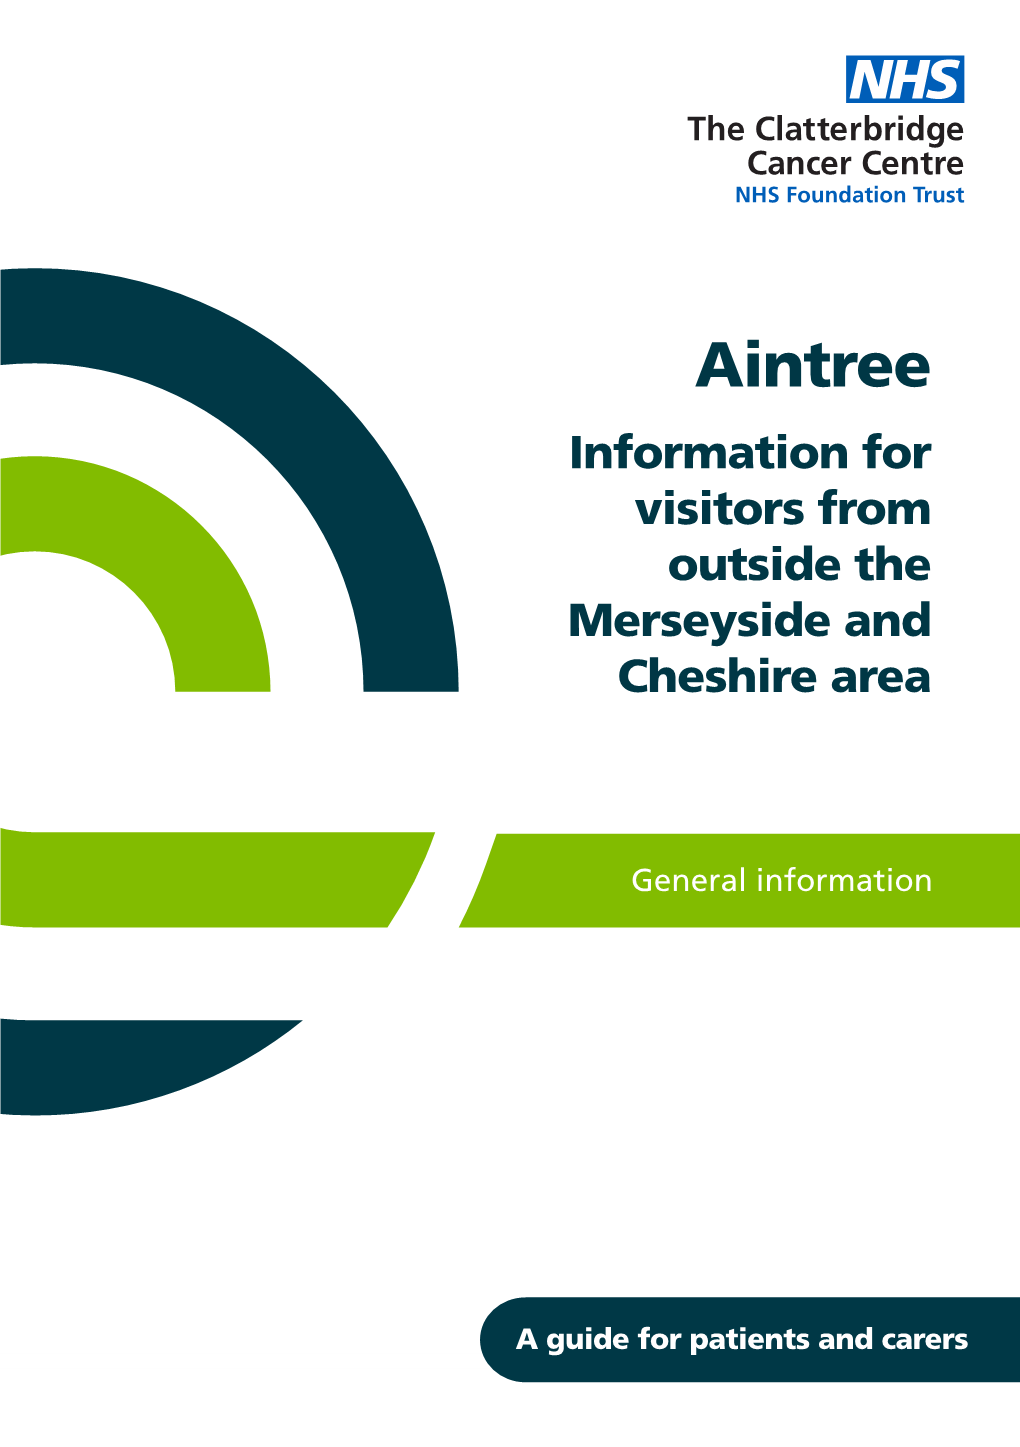 Aintree Information for Visitors from Outside the Merseyside and Cheshire Area